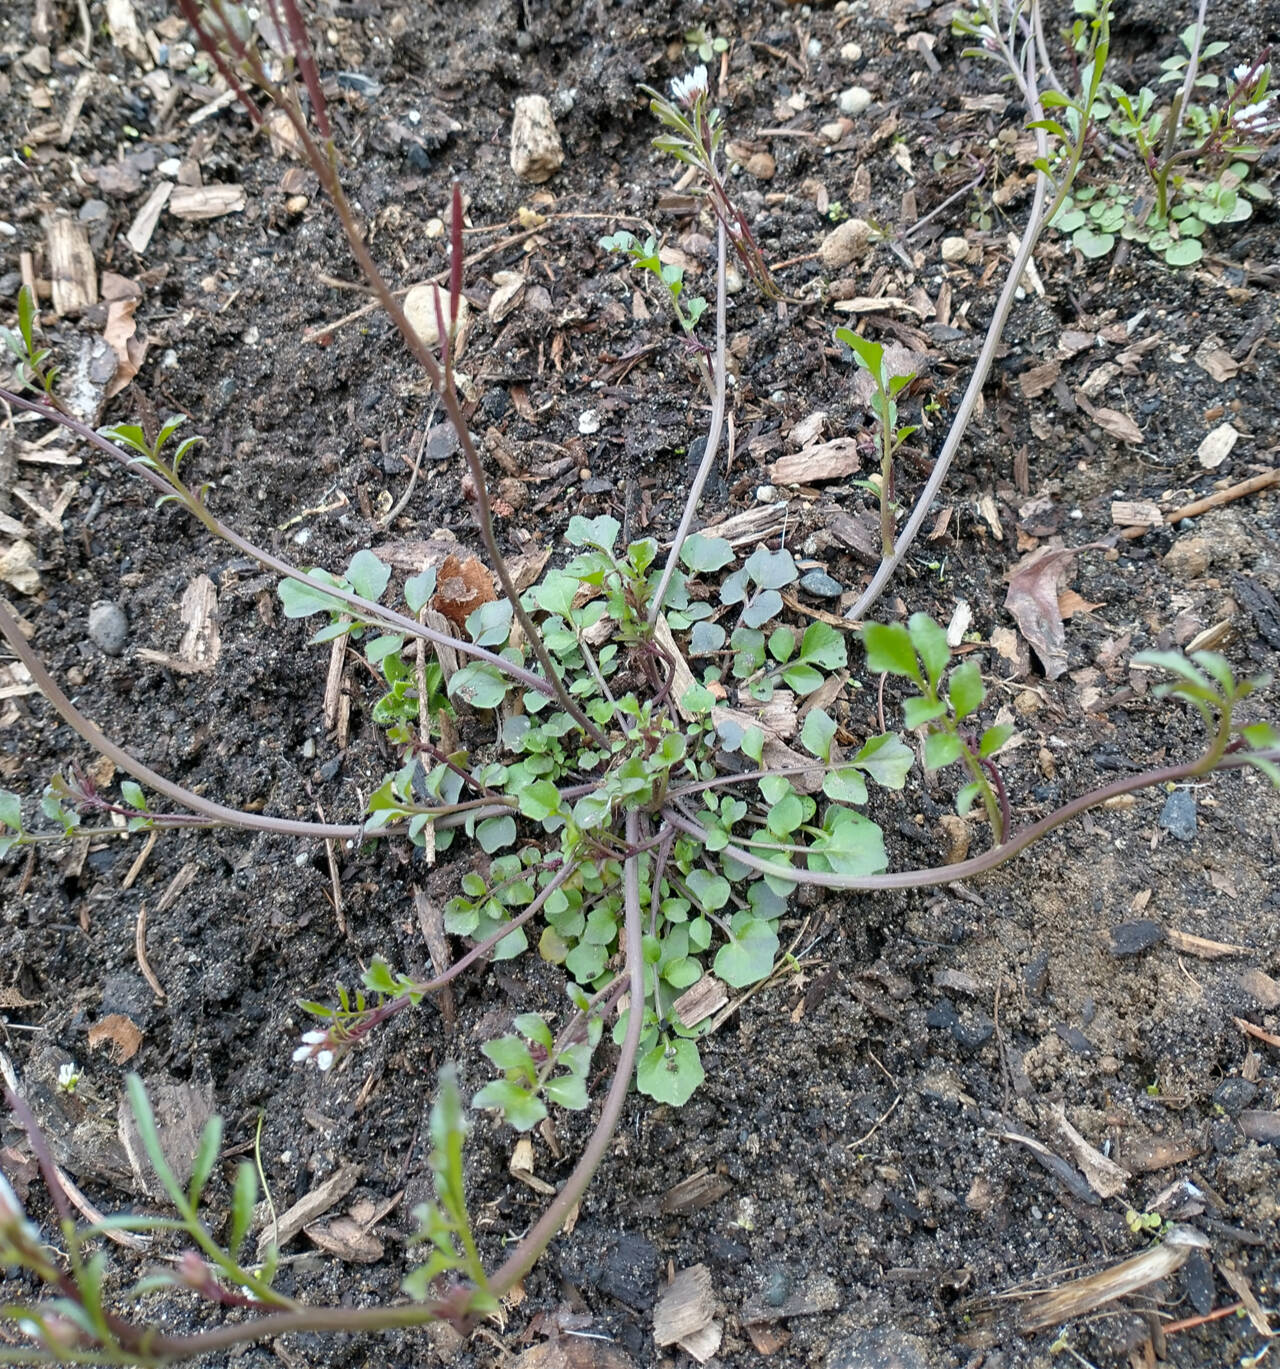 Submitted photo
Hotweed has delicate, compound leaves that grow in a small, flattened rosette (photo). It produces small white flowers that bloom in spring and produce seedpods.